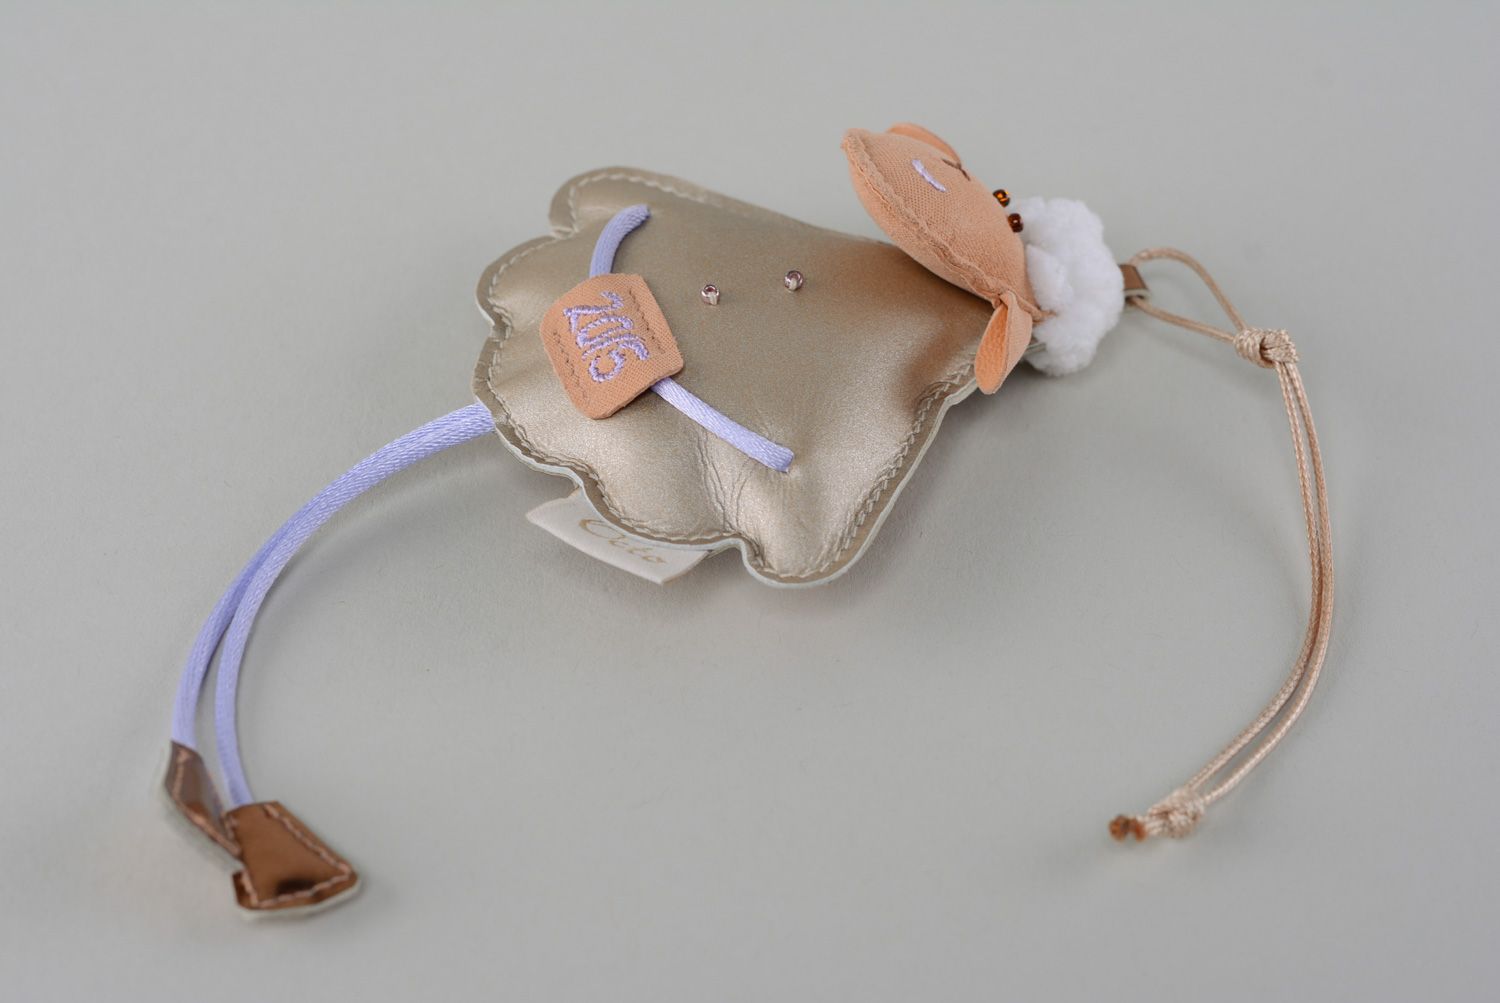 Leather bag charm or interior pendant in the shape of sheep photo 3